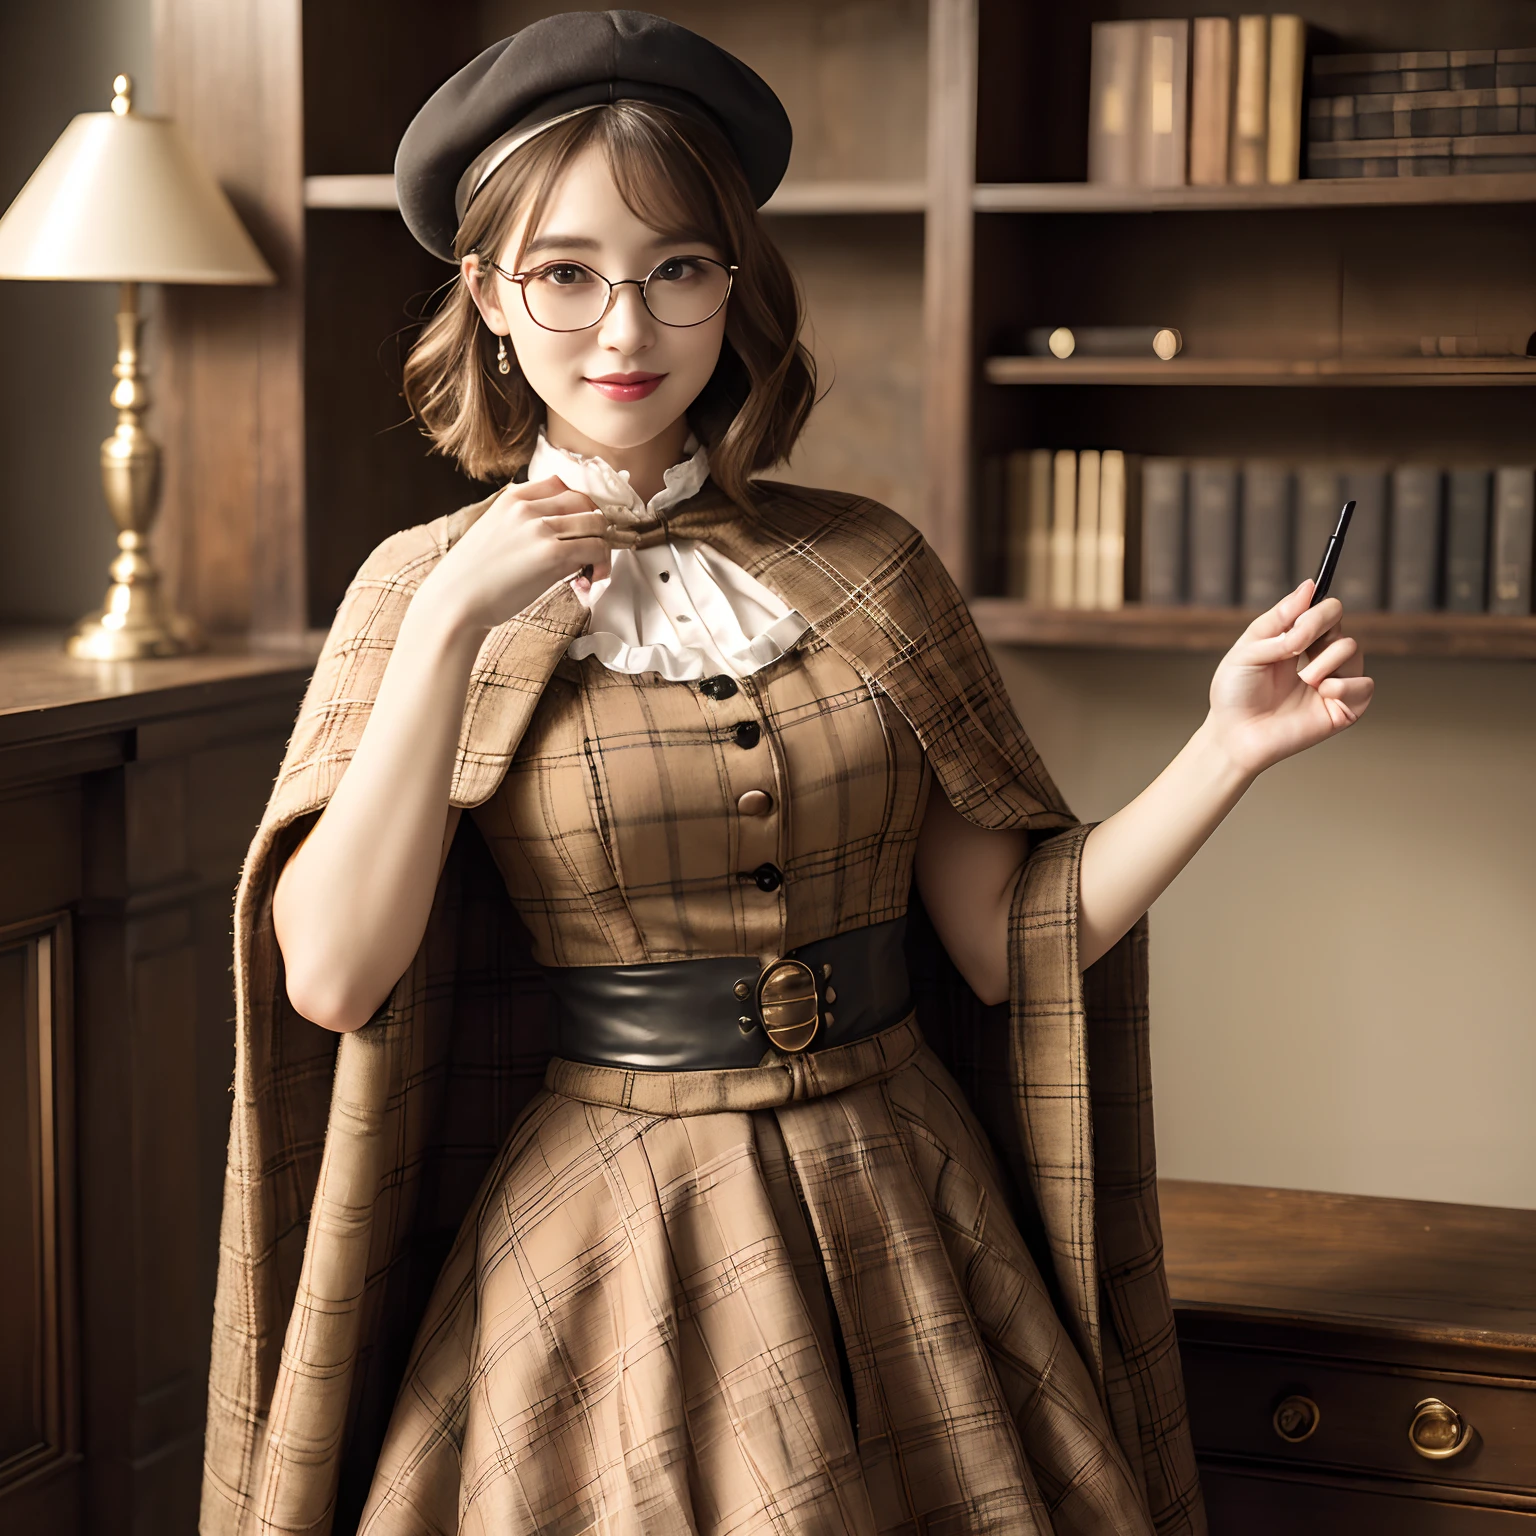 (((Best Quality, masutepiece, 超A high resolution、The most complex and detailed depictions)))、(One woman、Female Detective、Elegant round glasses、Pill glasses)、(((Plaid brown cape、Plaid brown beret、Brown Check Skirt、Short cape、The length of the cape is up to the waist、Outfit unified in brown and plaid、Wear the uniform、detective attire、Victorian costume)))、((retro vibes、Rooms at Medieval Europe、Huge bookshelf、Bookshelves on the wall、Stand in front of a bookshelf))、((Bright lighting in warm tones、perfect hand、A detailed face、hide one's hands))、Calm and elegant rooms、Perfect gas chamber、Perfect fingers、A slender、Emphasize body lines、Beautiful white teeth、Perfect shiny hair and skin、perfect anatomia、Smile、Smile at me、short-hair、straight haired